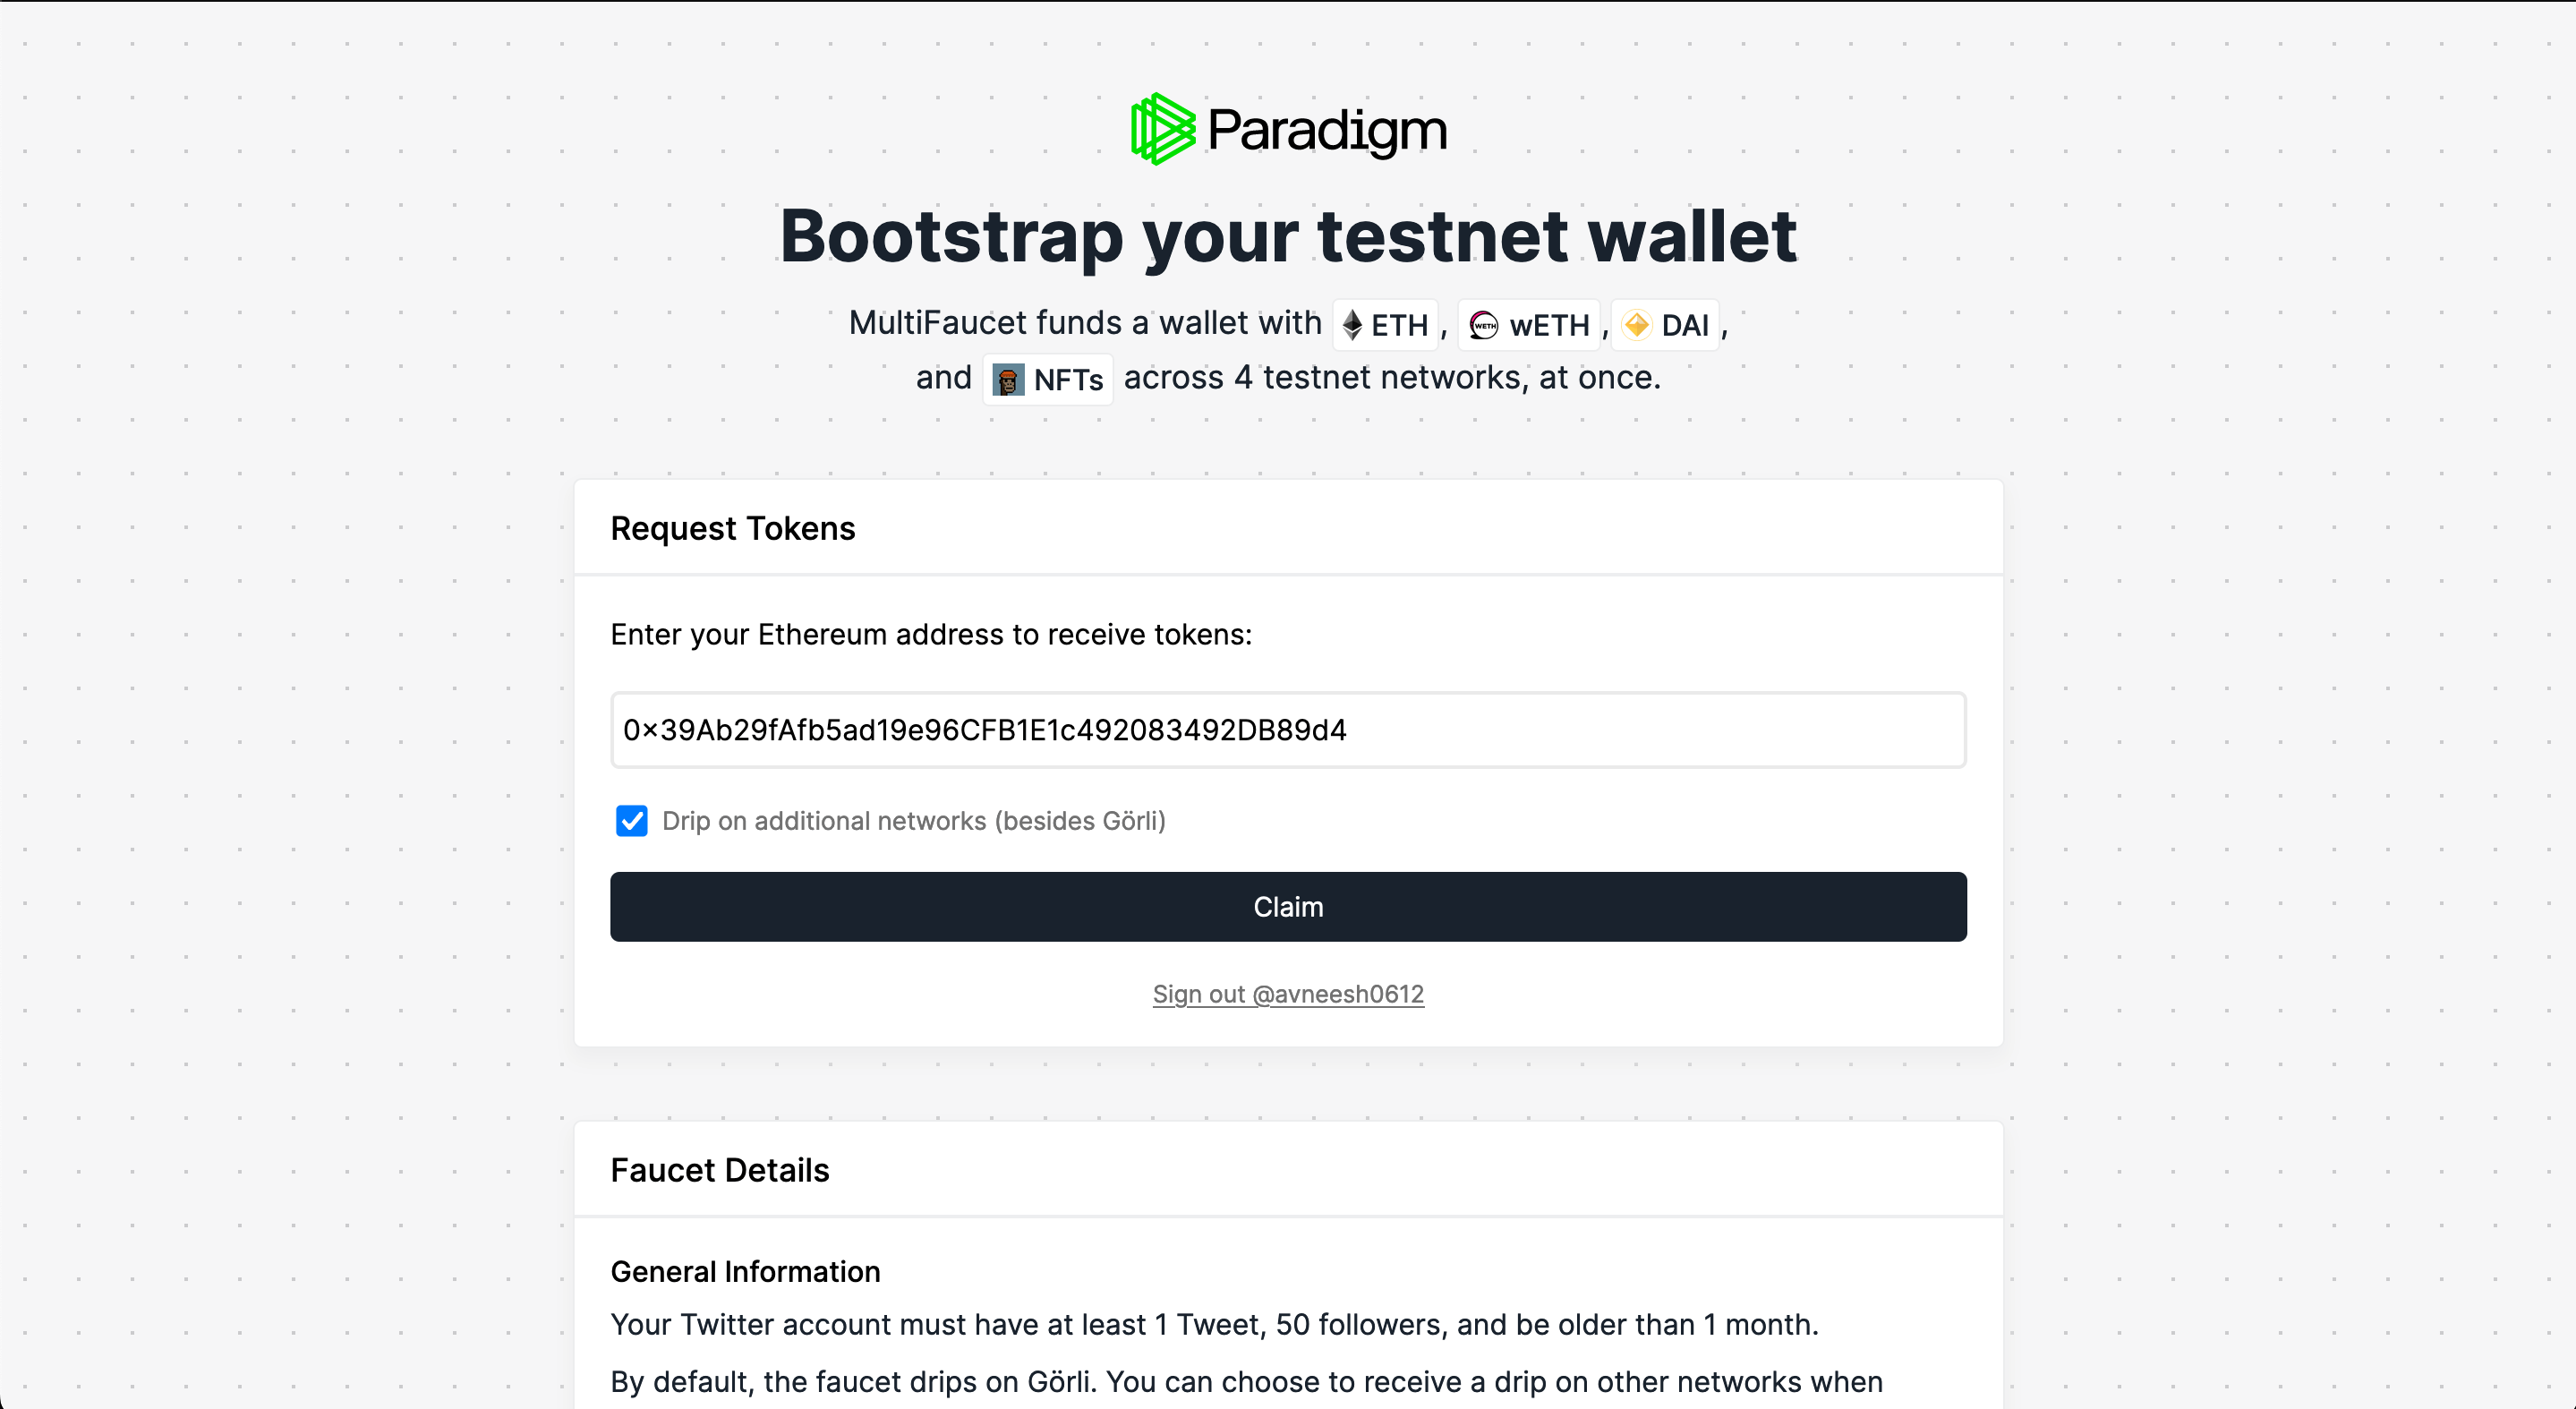 Request tokens from Paradigm Faucet